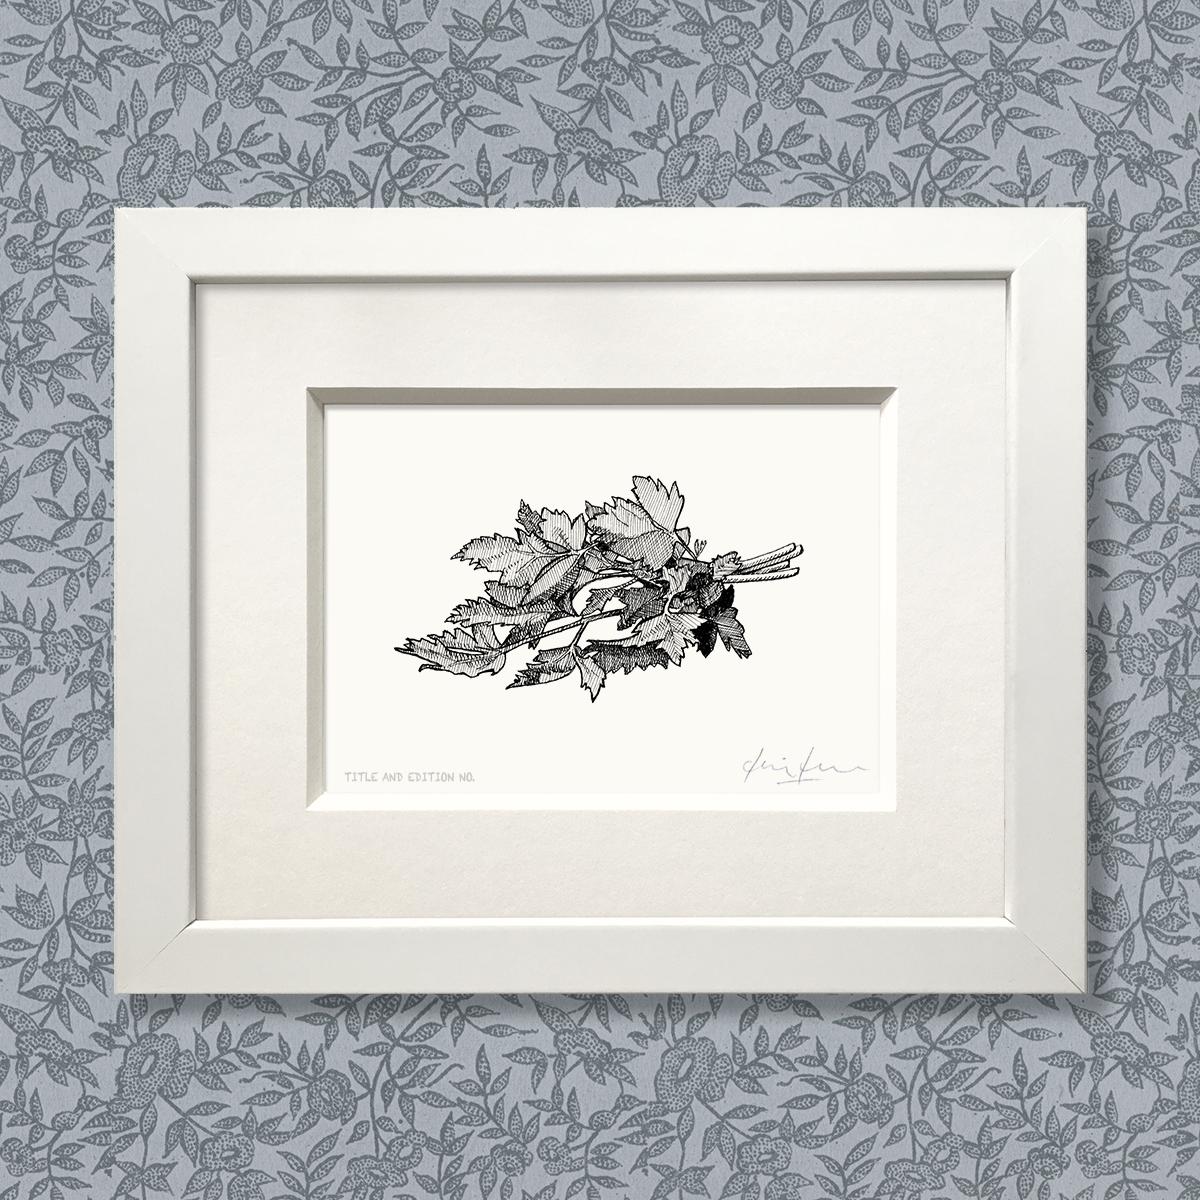 Limited edition print from pen and ink drawing of a bunch of parsley in a white frame